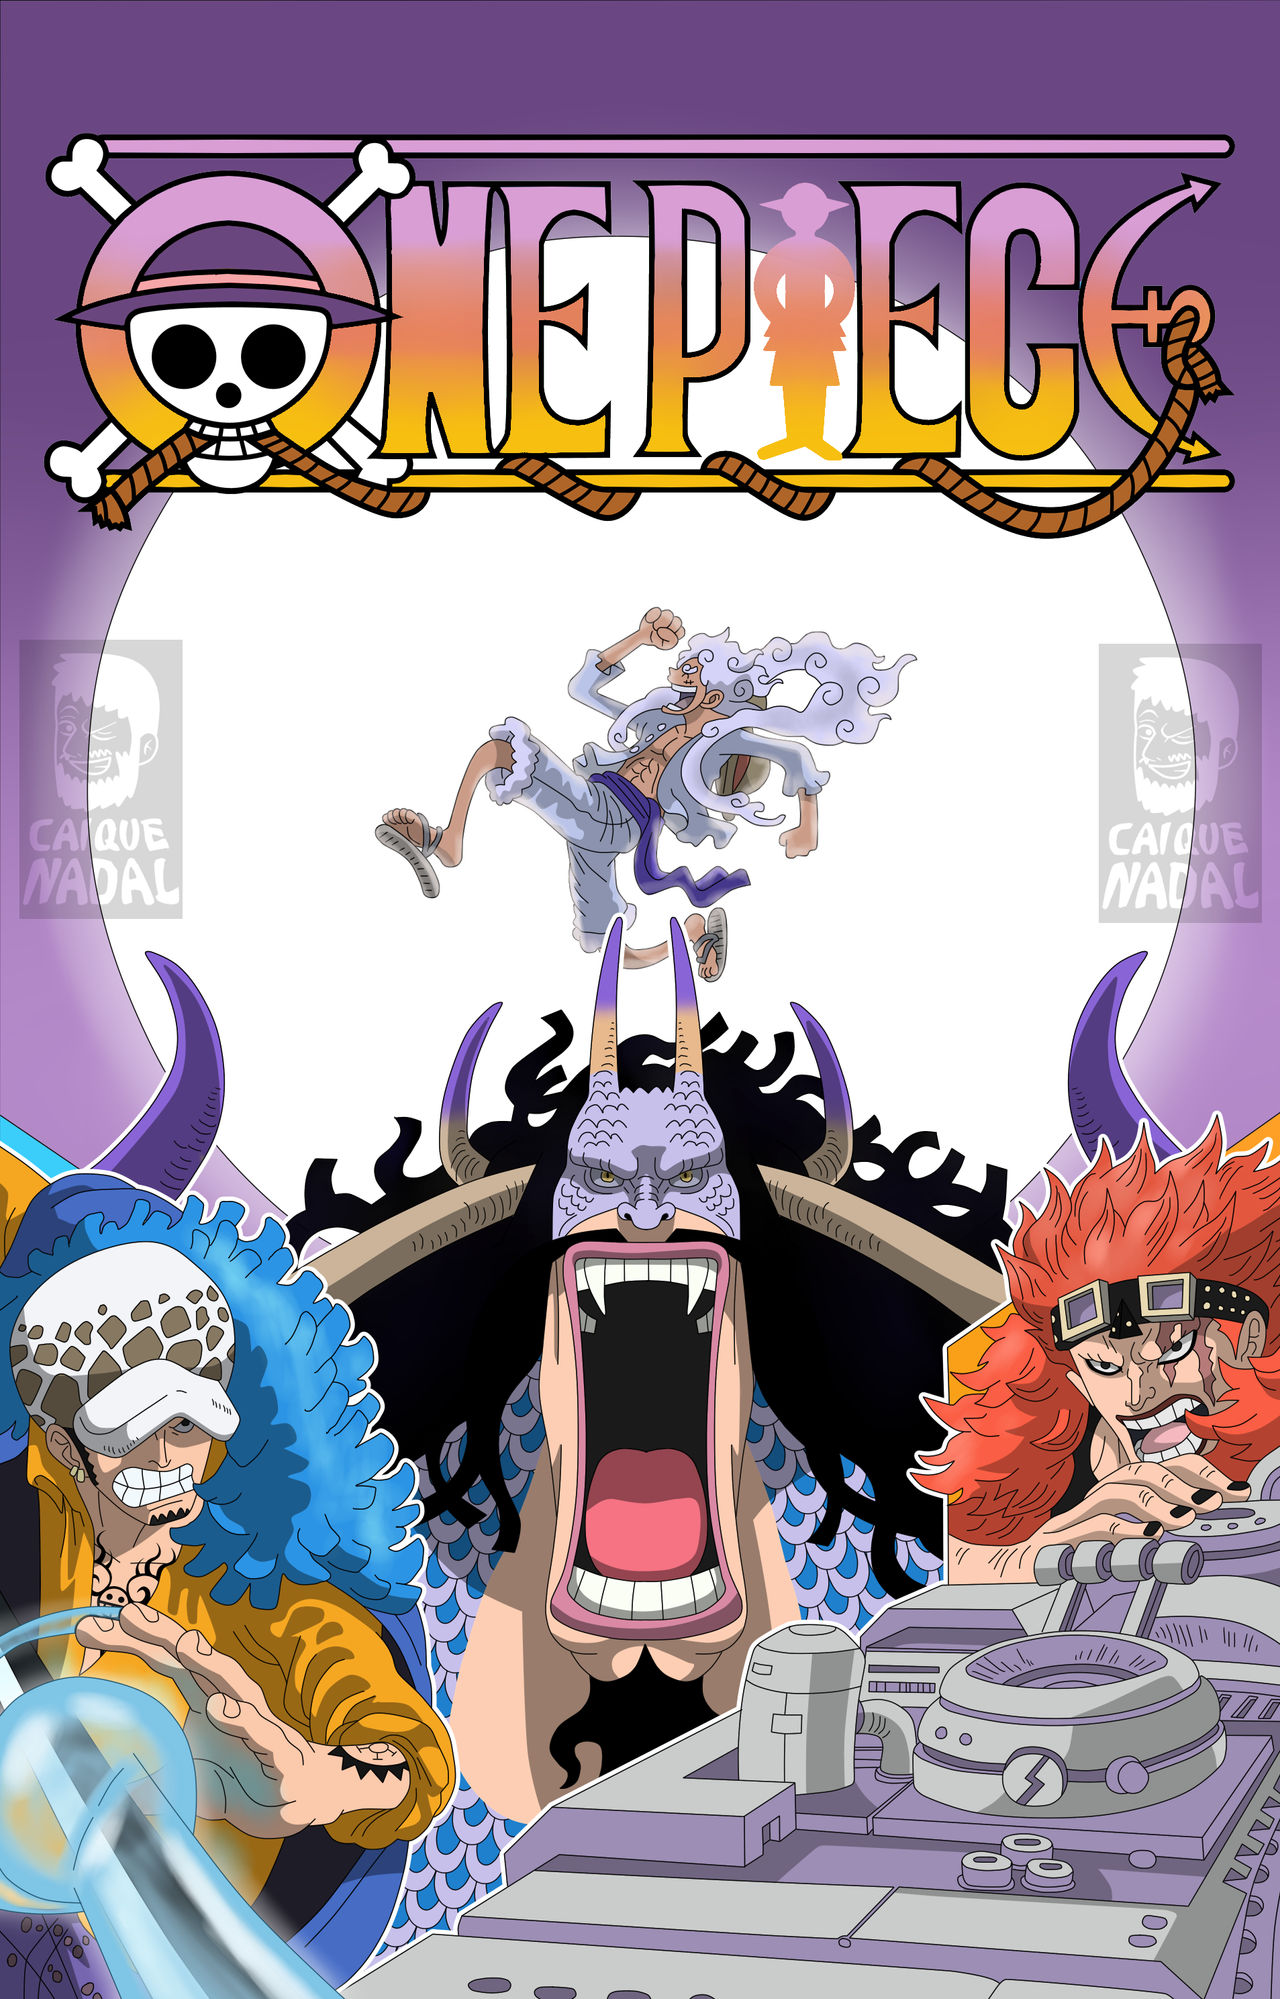 One Piece - chapter 103 by caiquenadal on DeviantArt